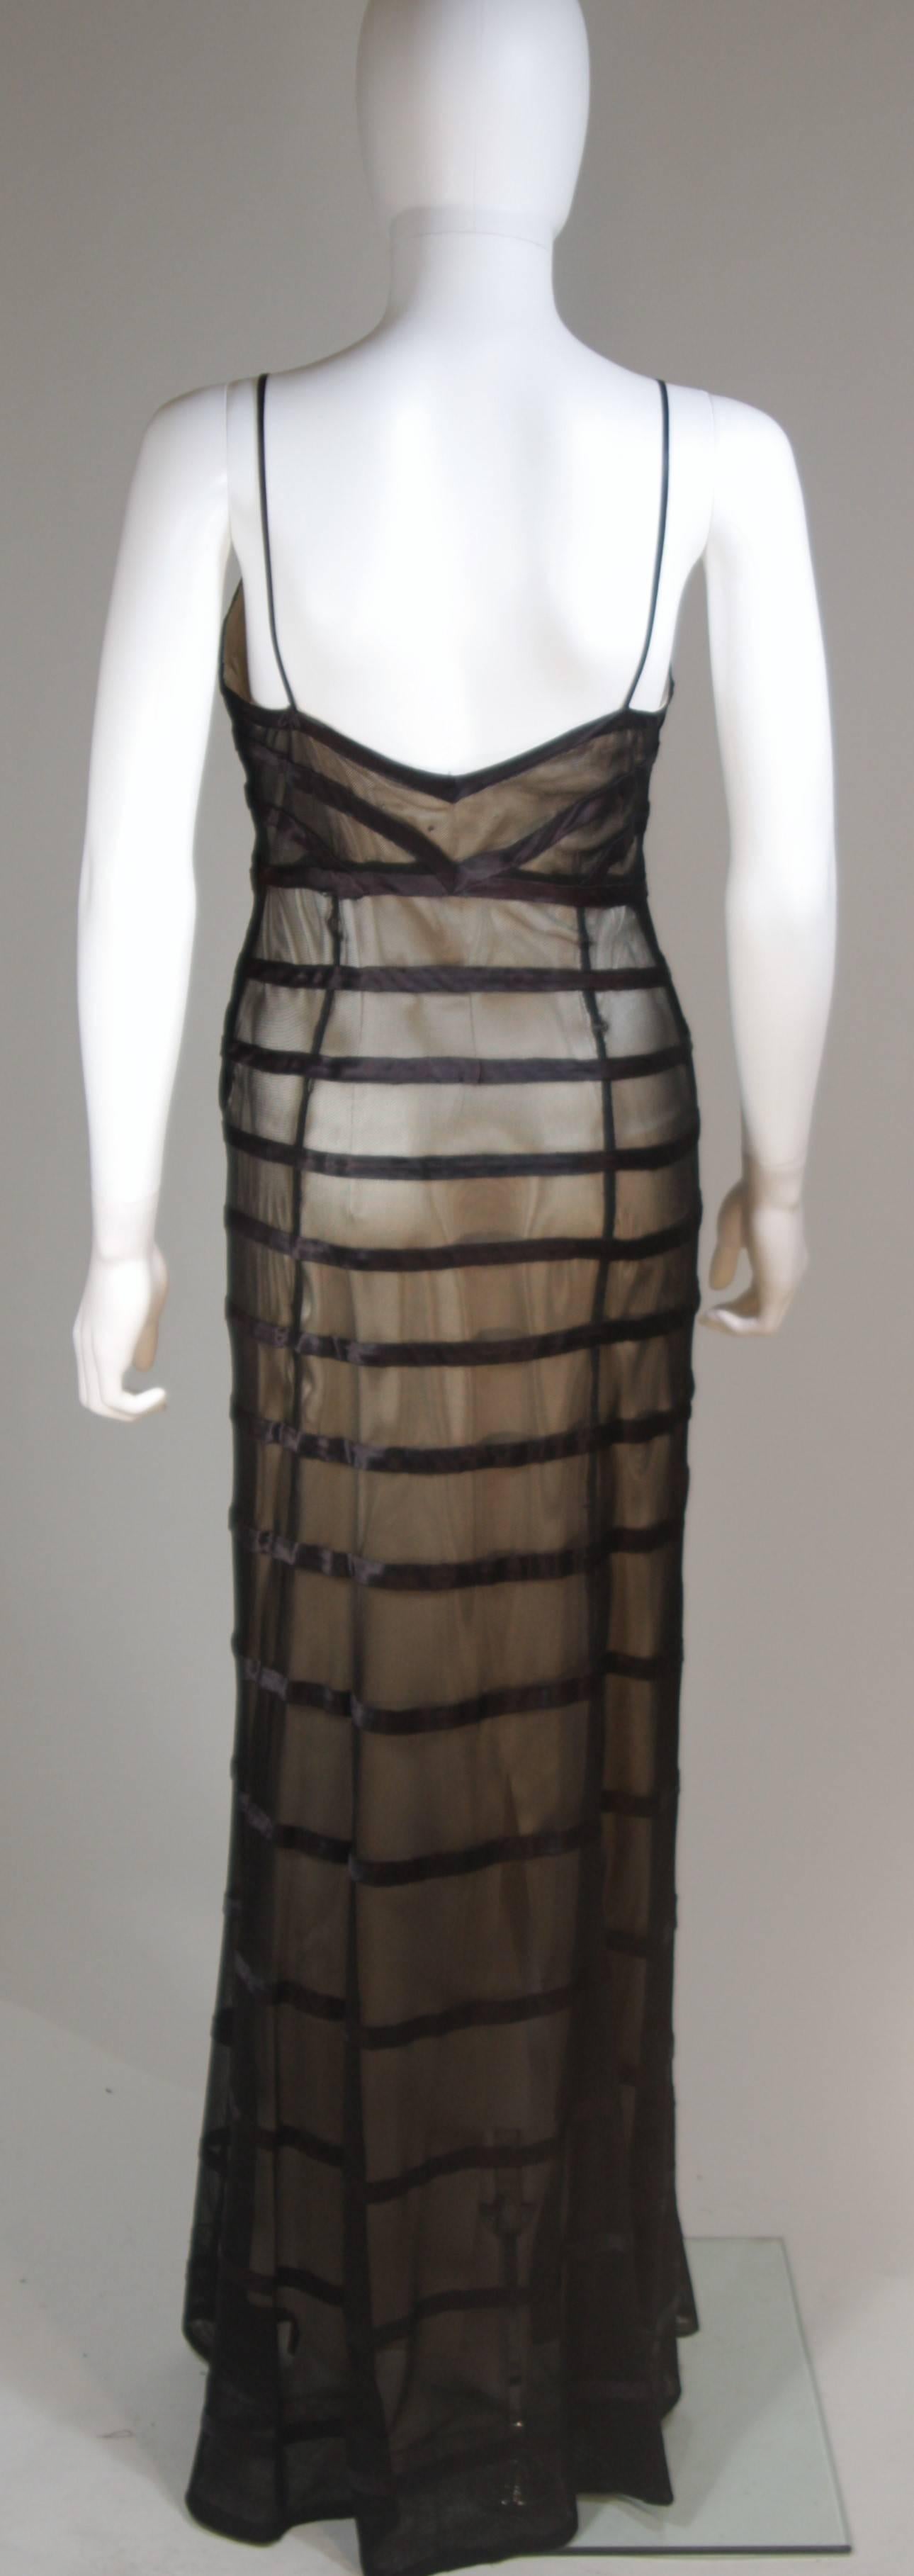 1930's Black Mesh Gown with Silk Accents and Nude Slip Size 2-4 For Sale 2